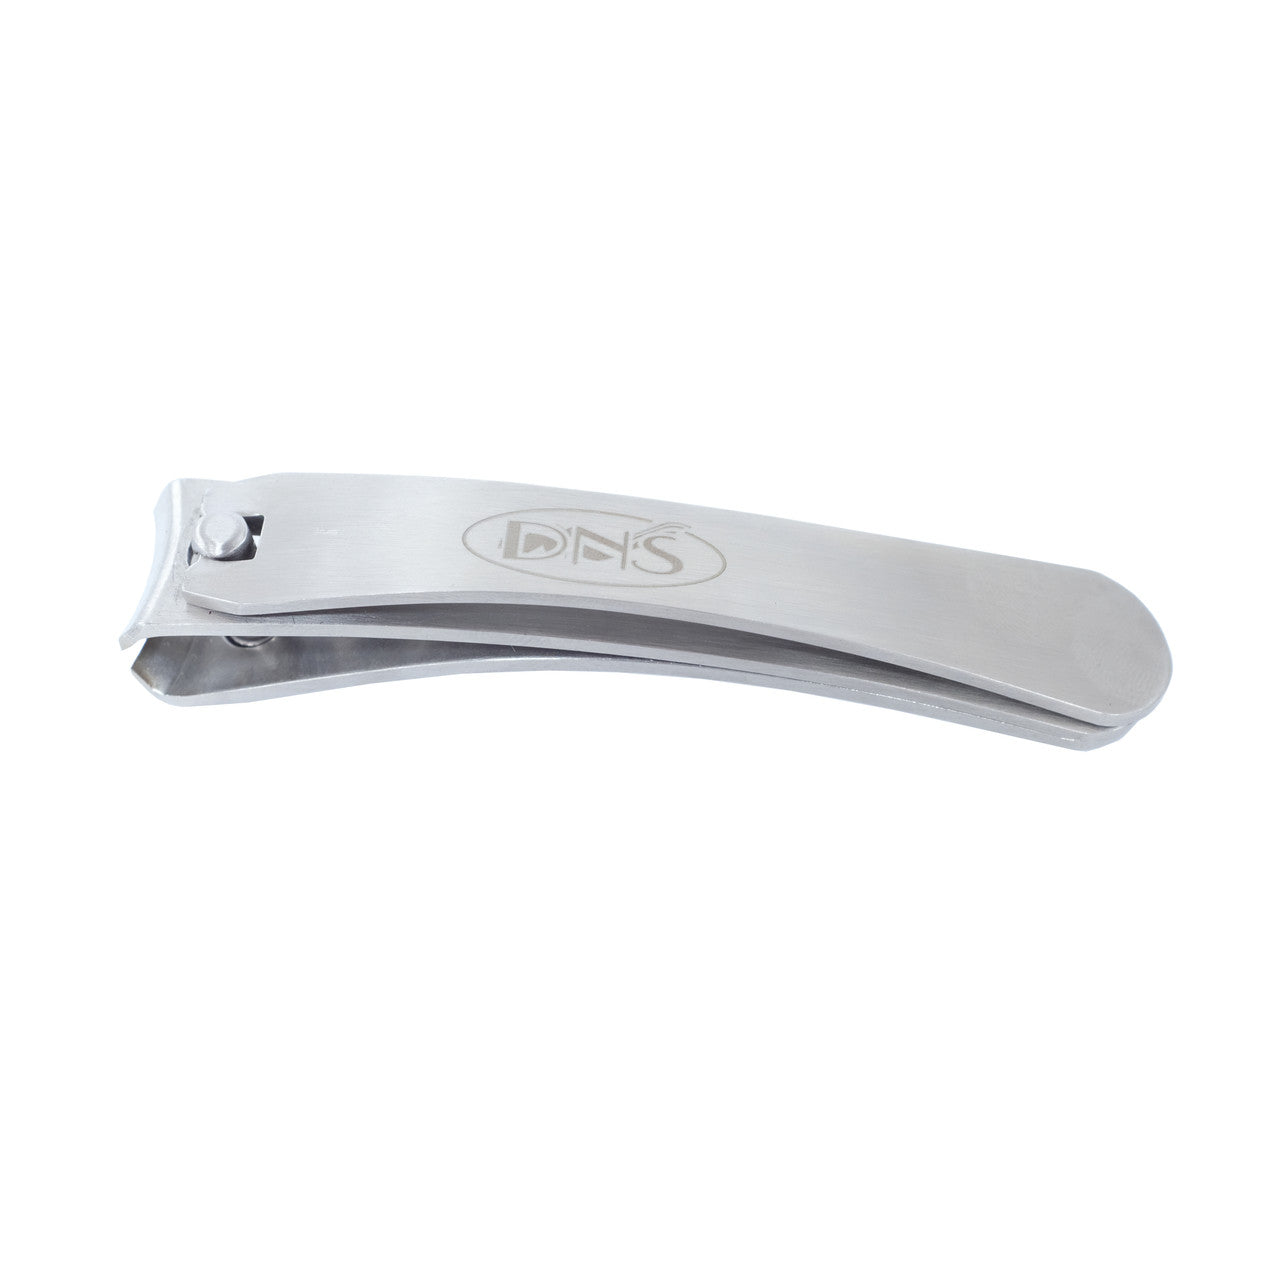 Lever Curved Edge Arched Nail Clippers Diamond Nail Supplies